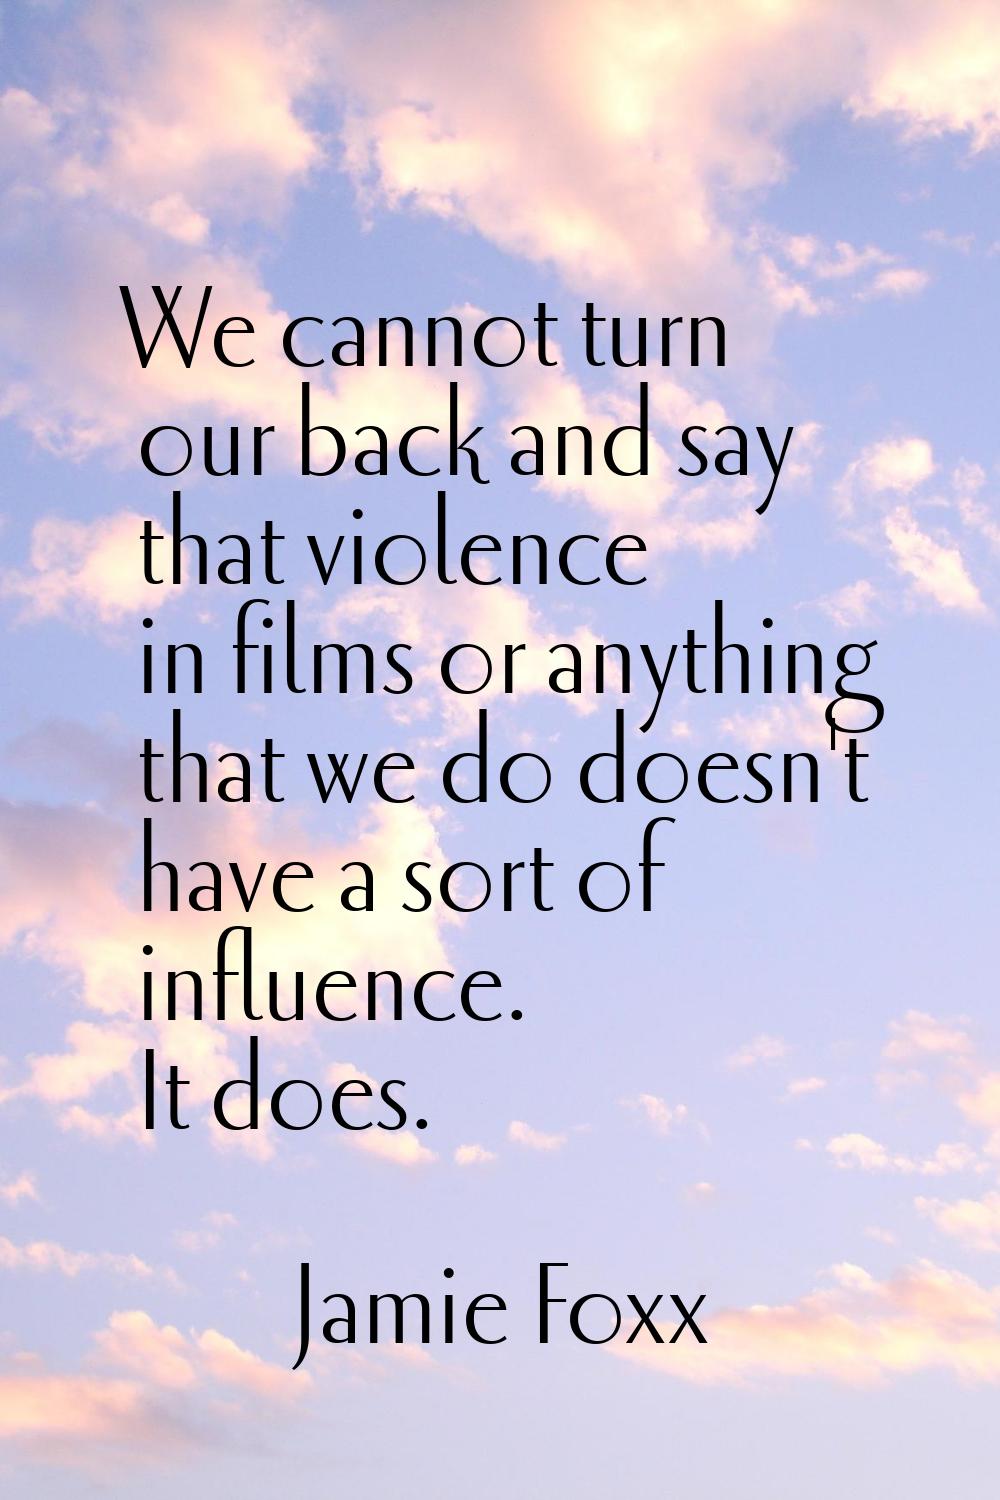 We cannot turn our back and say that violence in films or anything that we do doesn't have a sort o